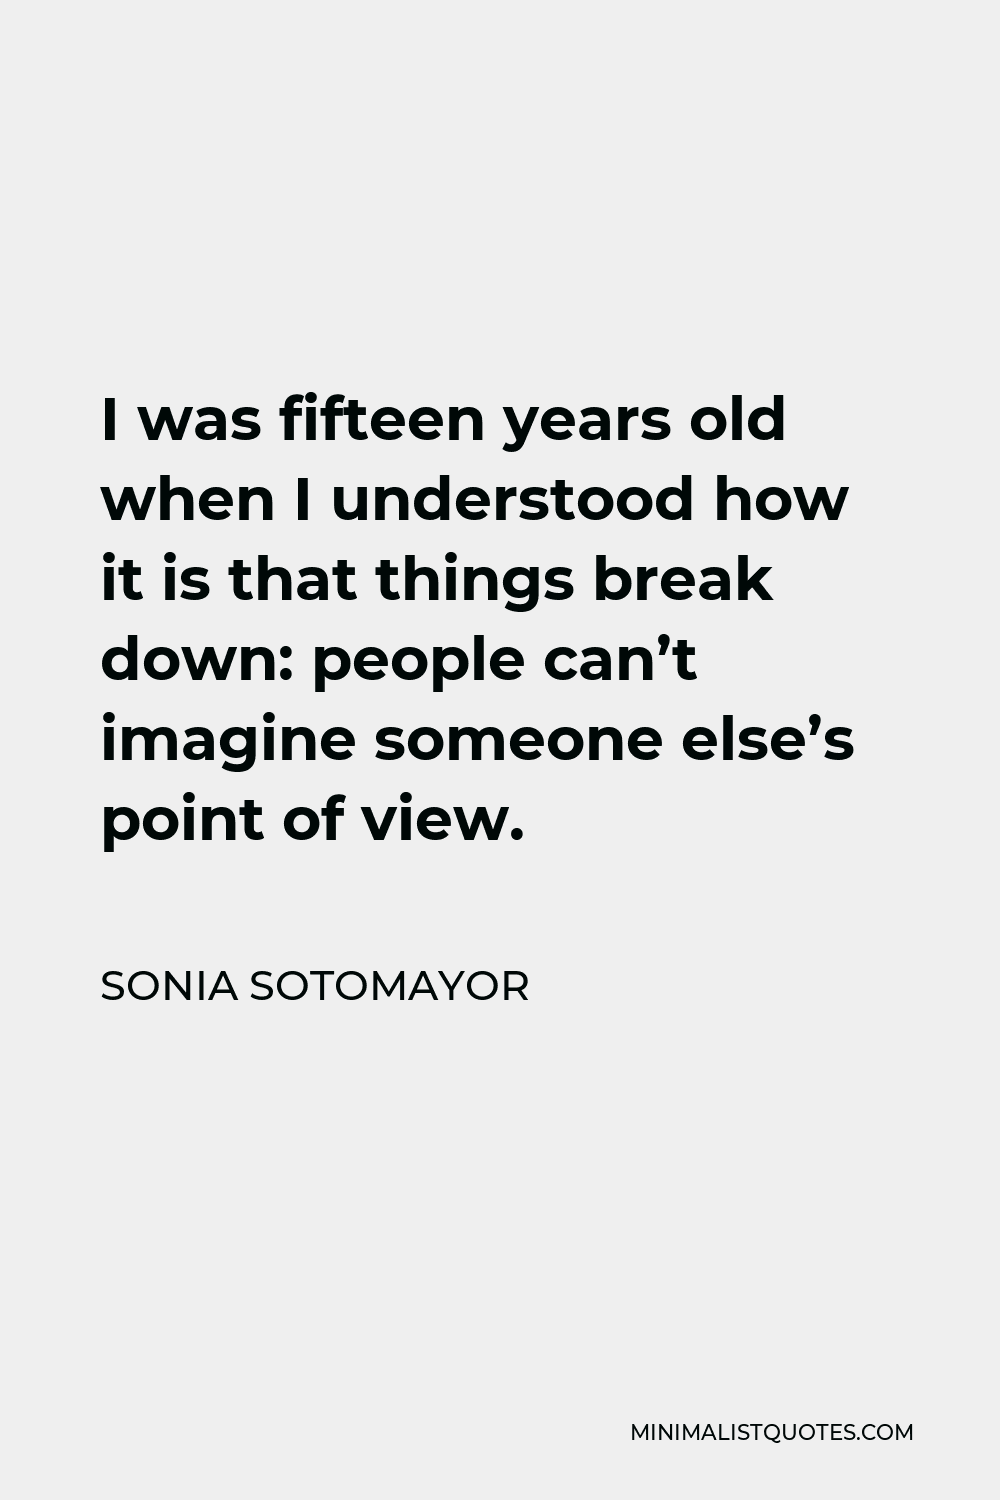 Sonia Sotomayor Quote - I was fifteen years old when I understood how it is that things break down: people can’t imagine someone else’s point of view.